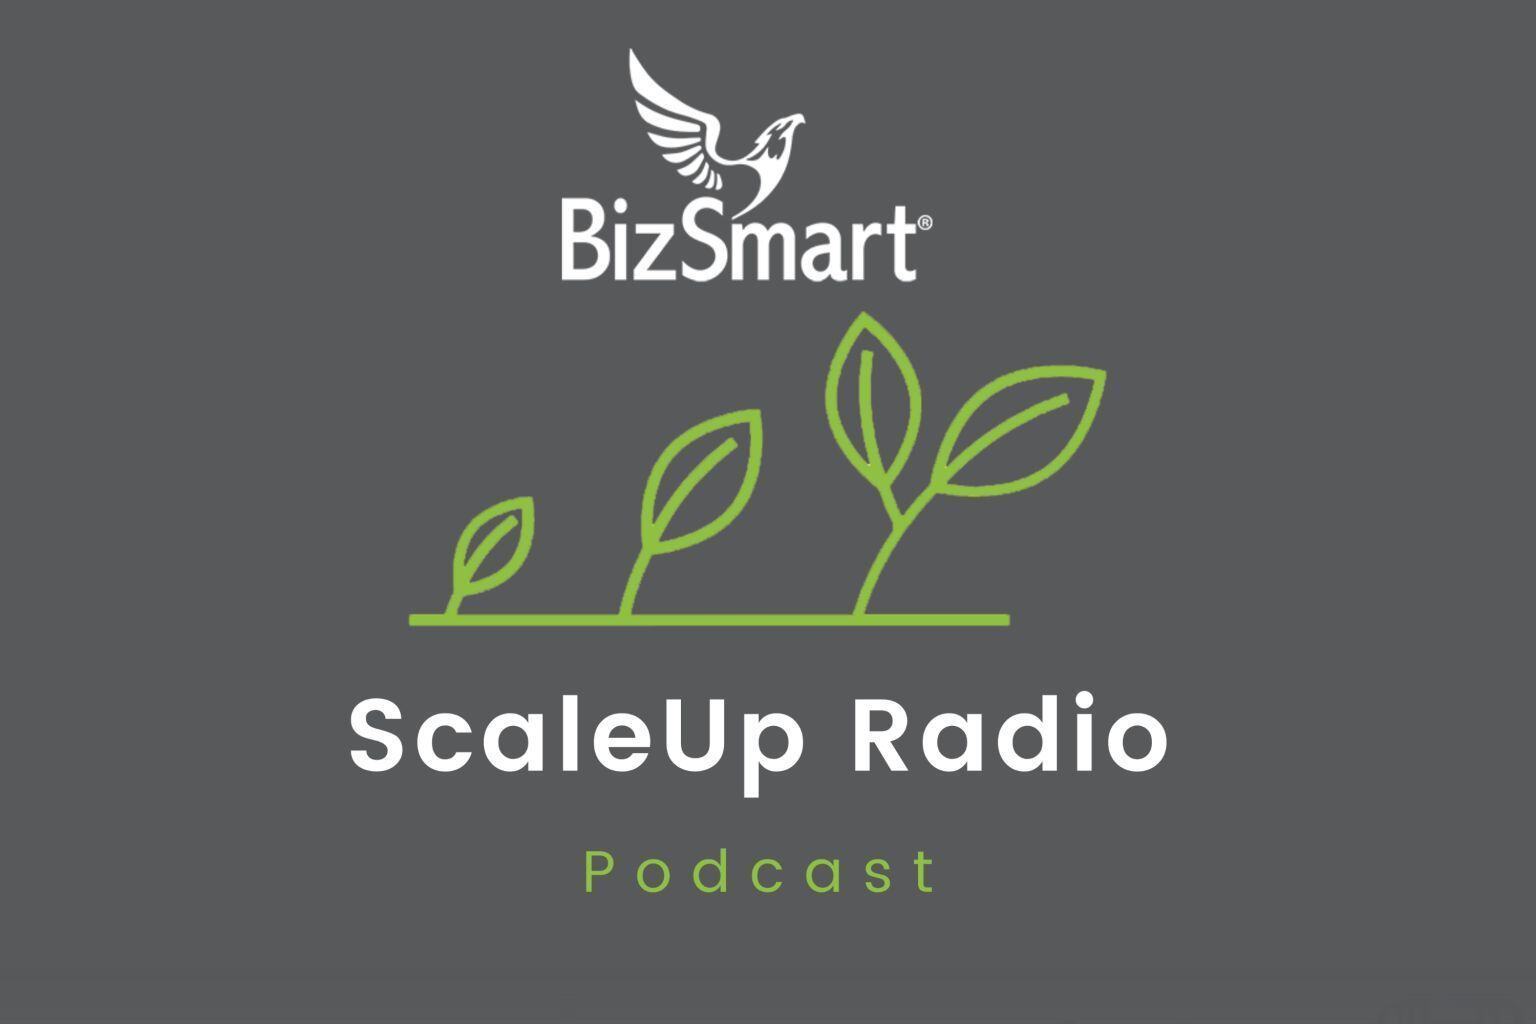 CEO Mark Kotter Shares Insights on ScaleUp Radio Podcast